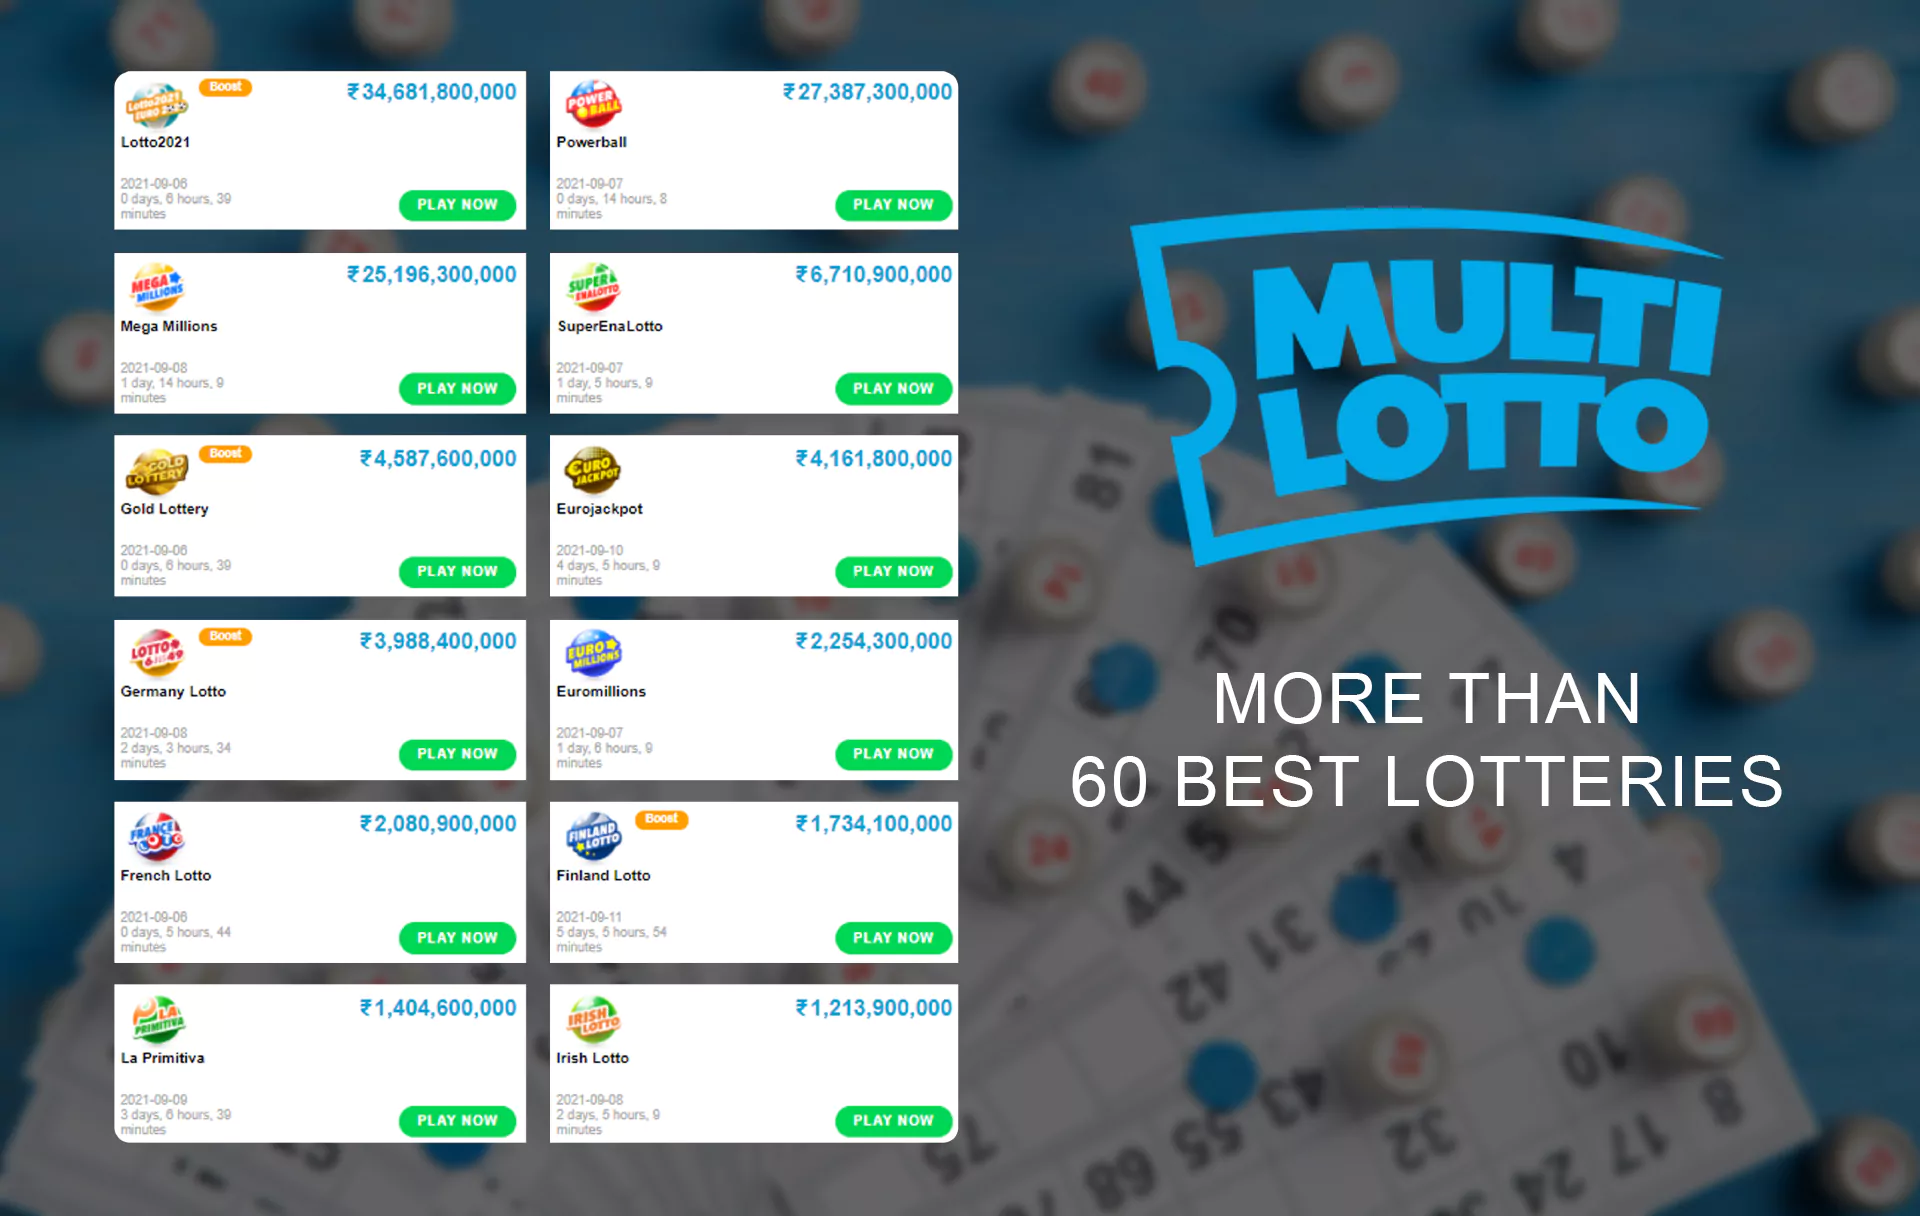 There are more than 60 international lotteries tickets you can buy on MultiLotto.